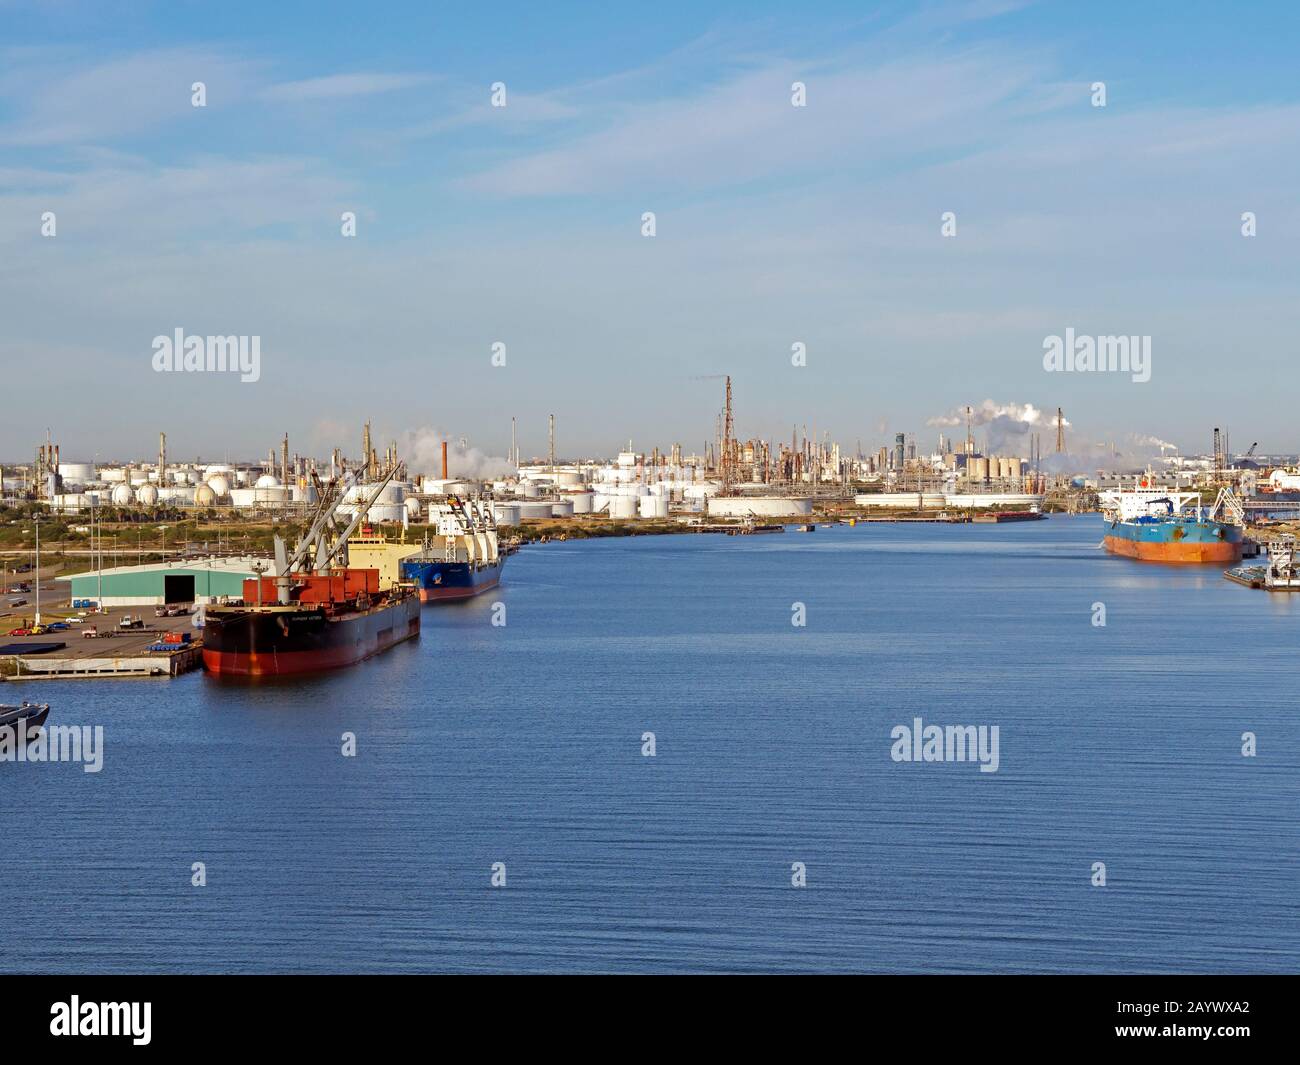 An elevated view of The Port Of Corpus Christi, Texas USA taken from the old Harbor Bridge. Stock Photo